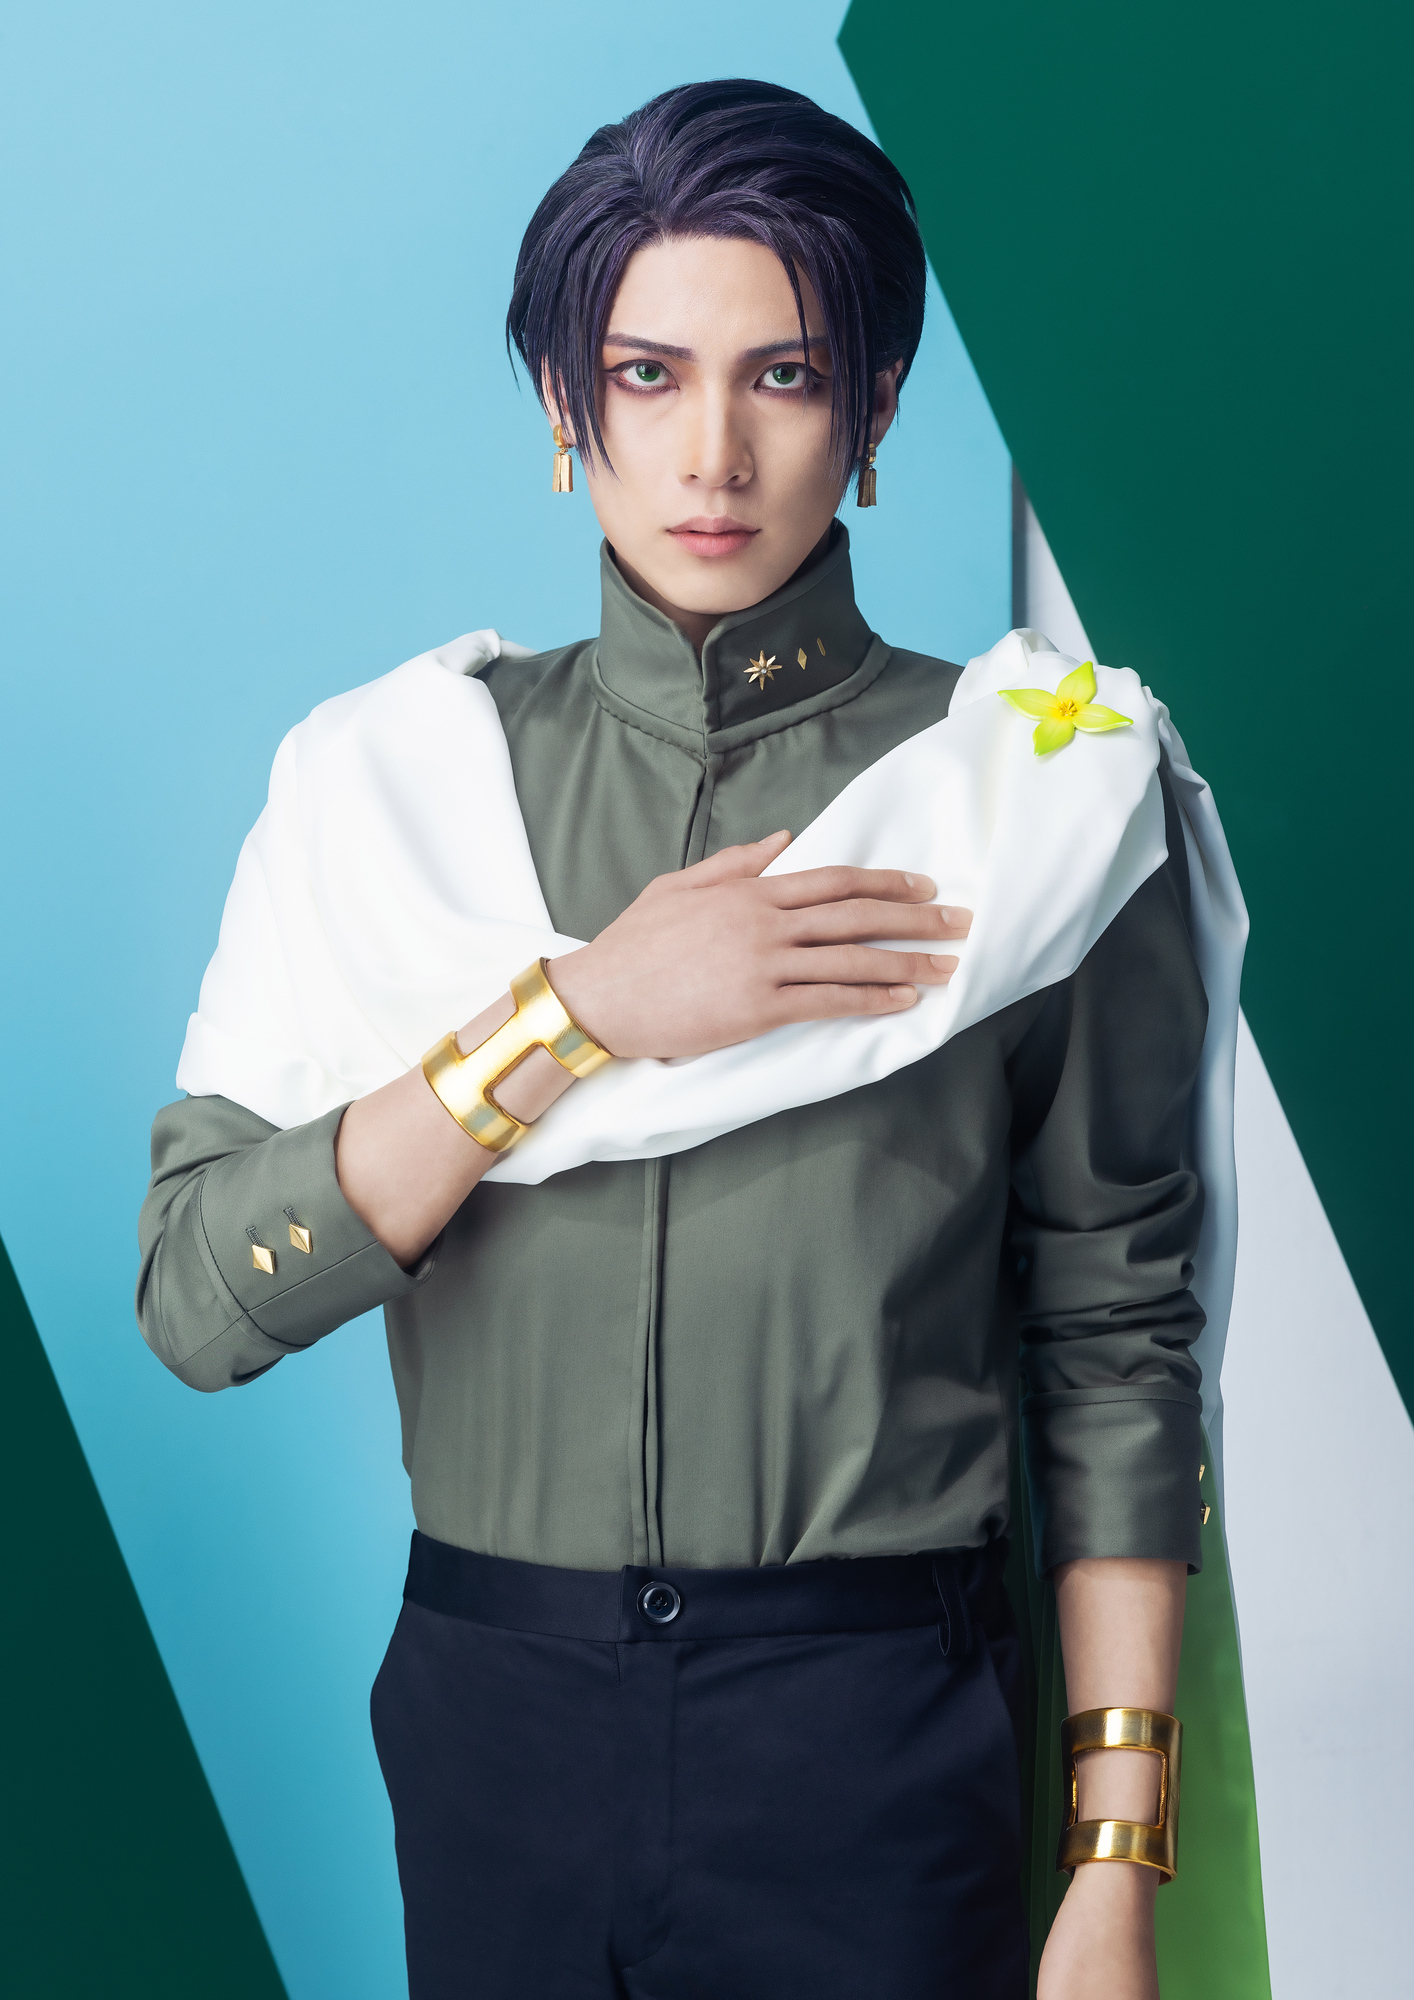 MANKAI STAGE『A3!』ACT2! ～WINTER 2023～出演決定！ | 輝馬Official Site